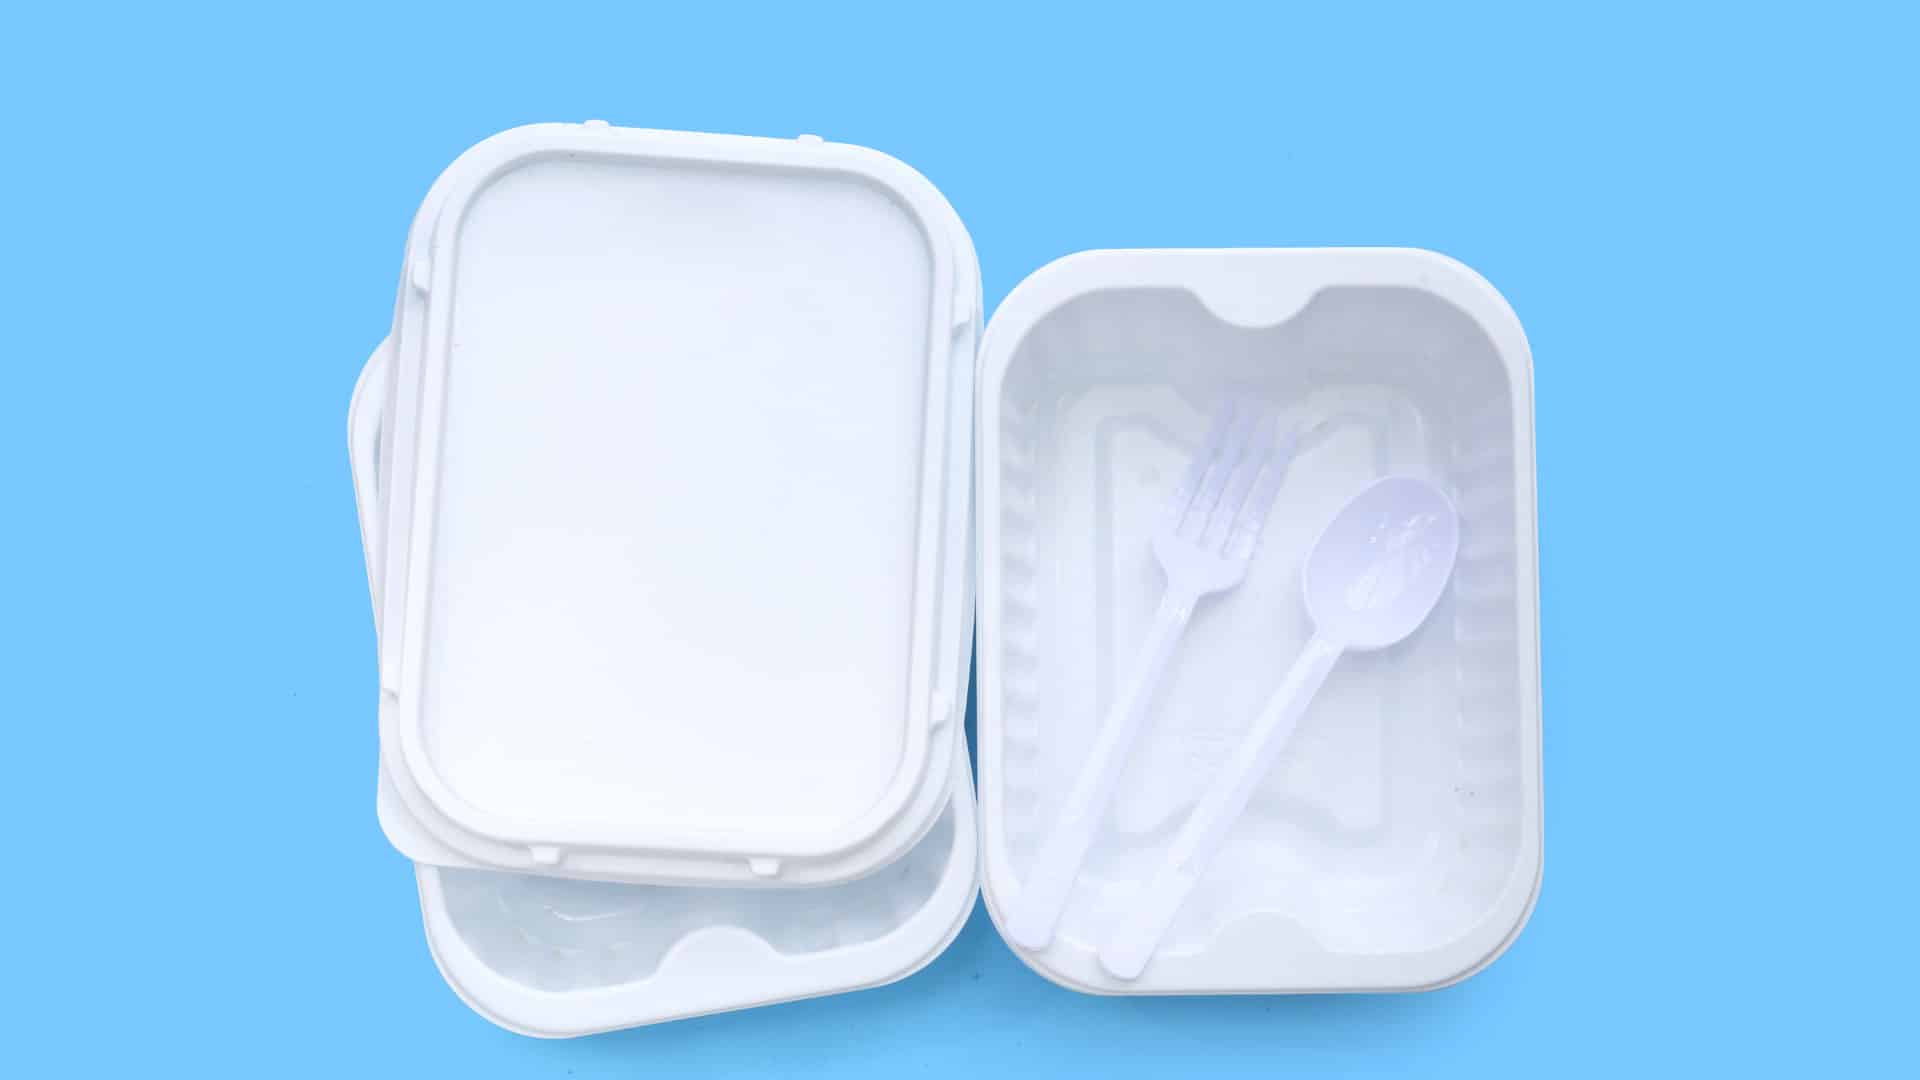 Featured image for “Can Styrofoam Be Microwaved? (Safety and Risks)”